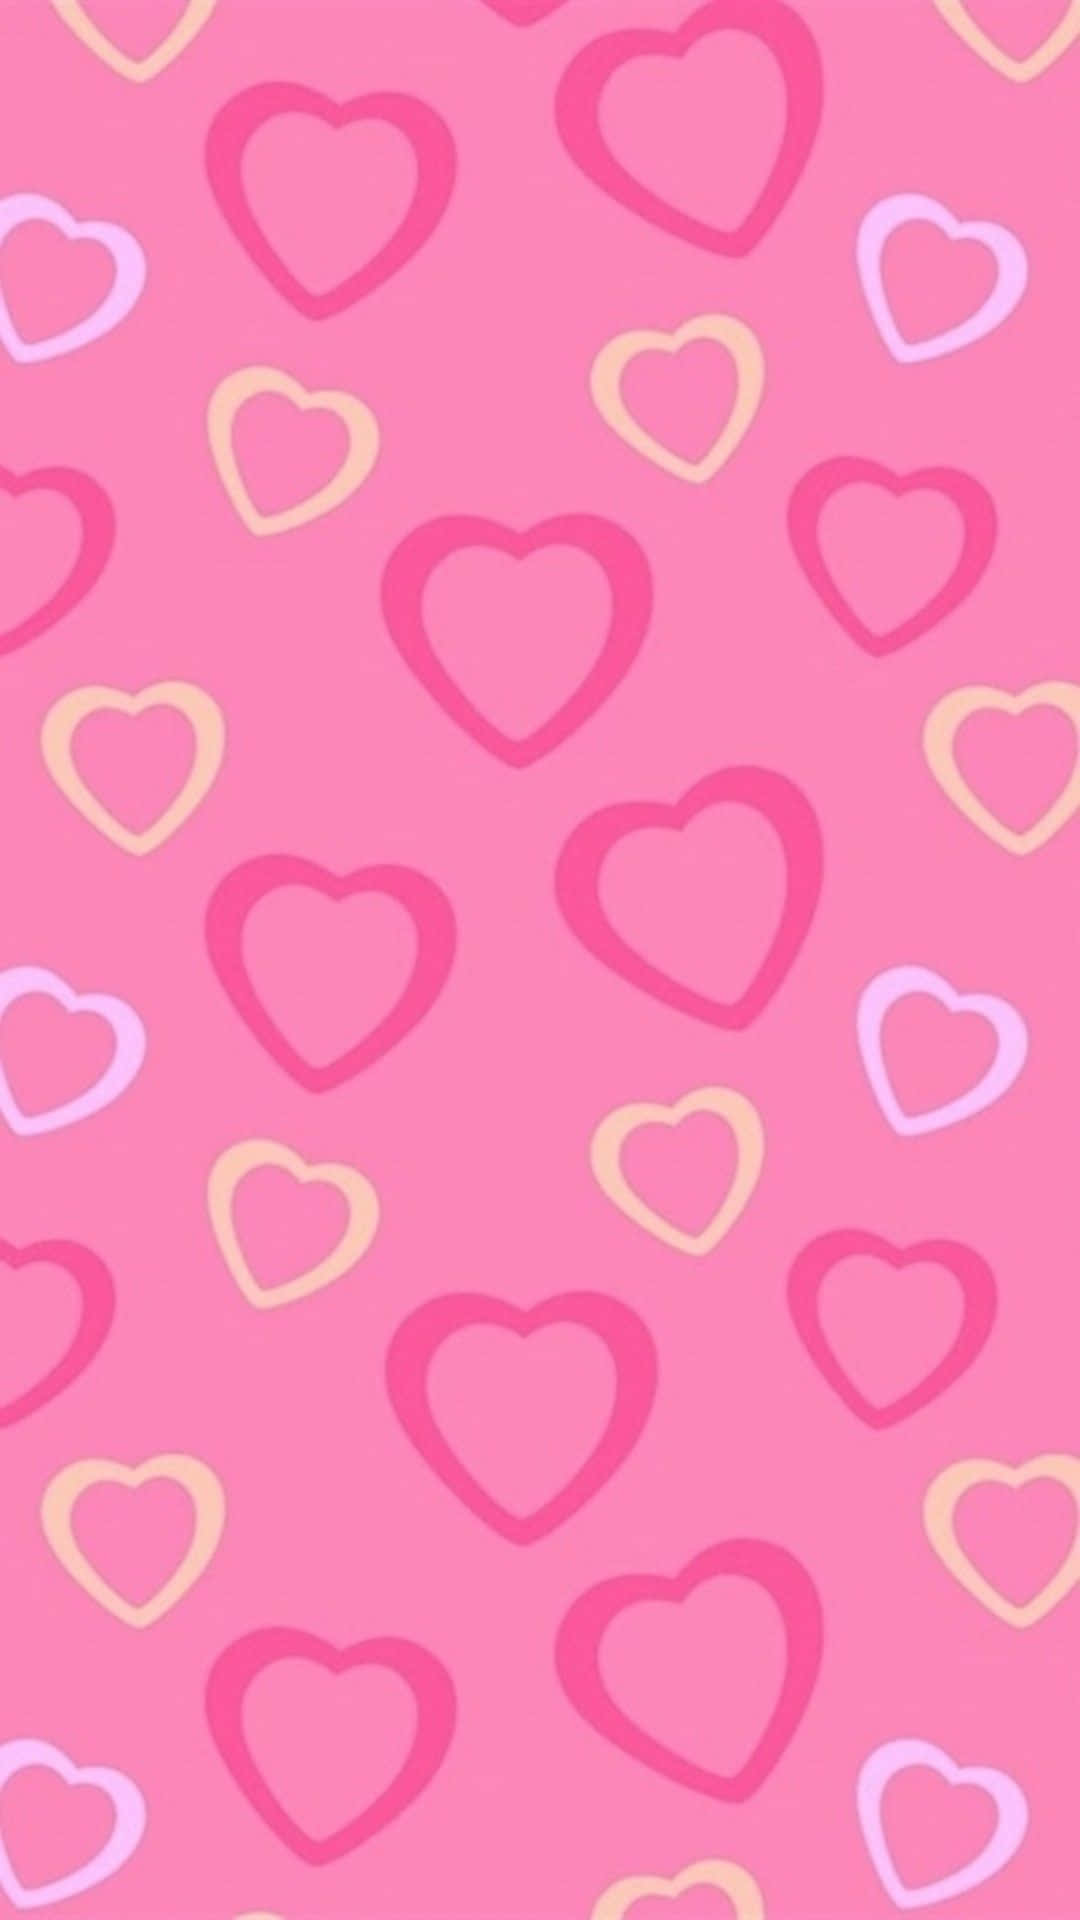 Simple Heart Pink Girly Wallpaper